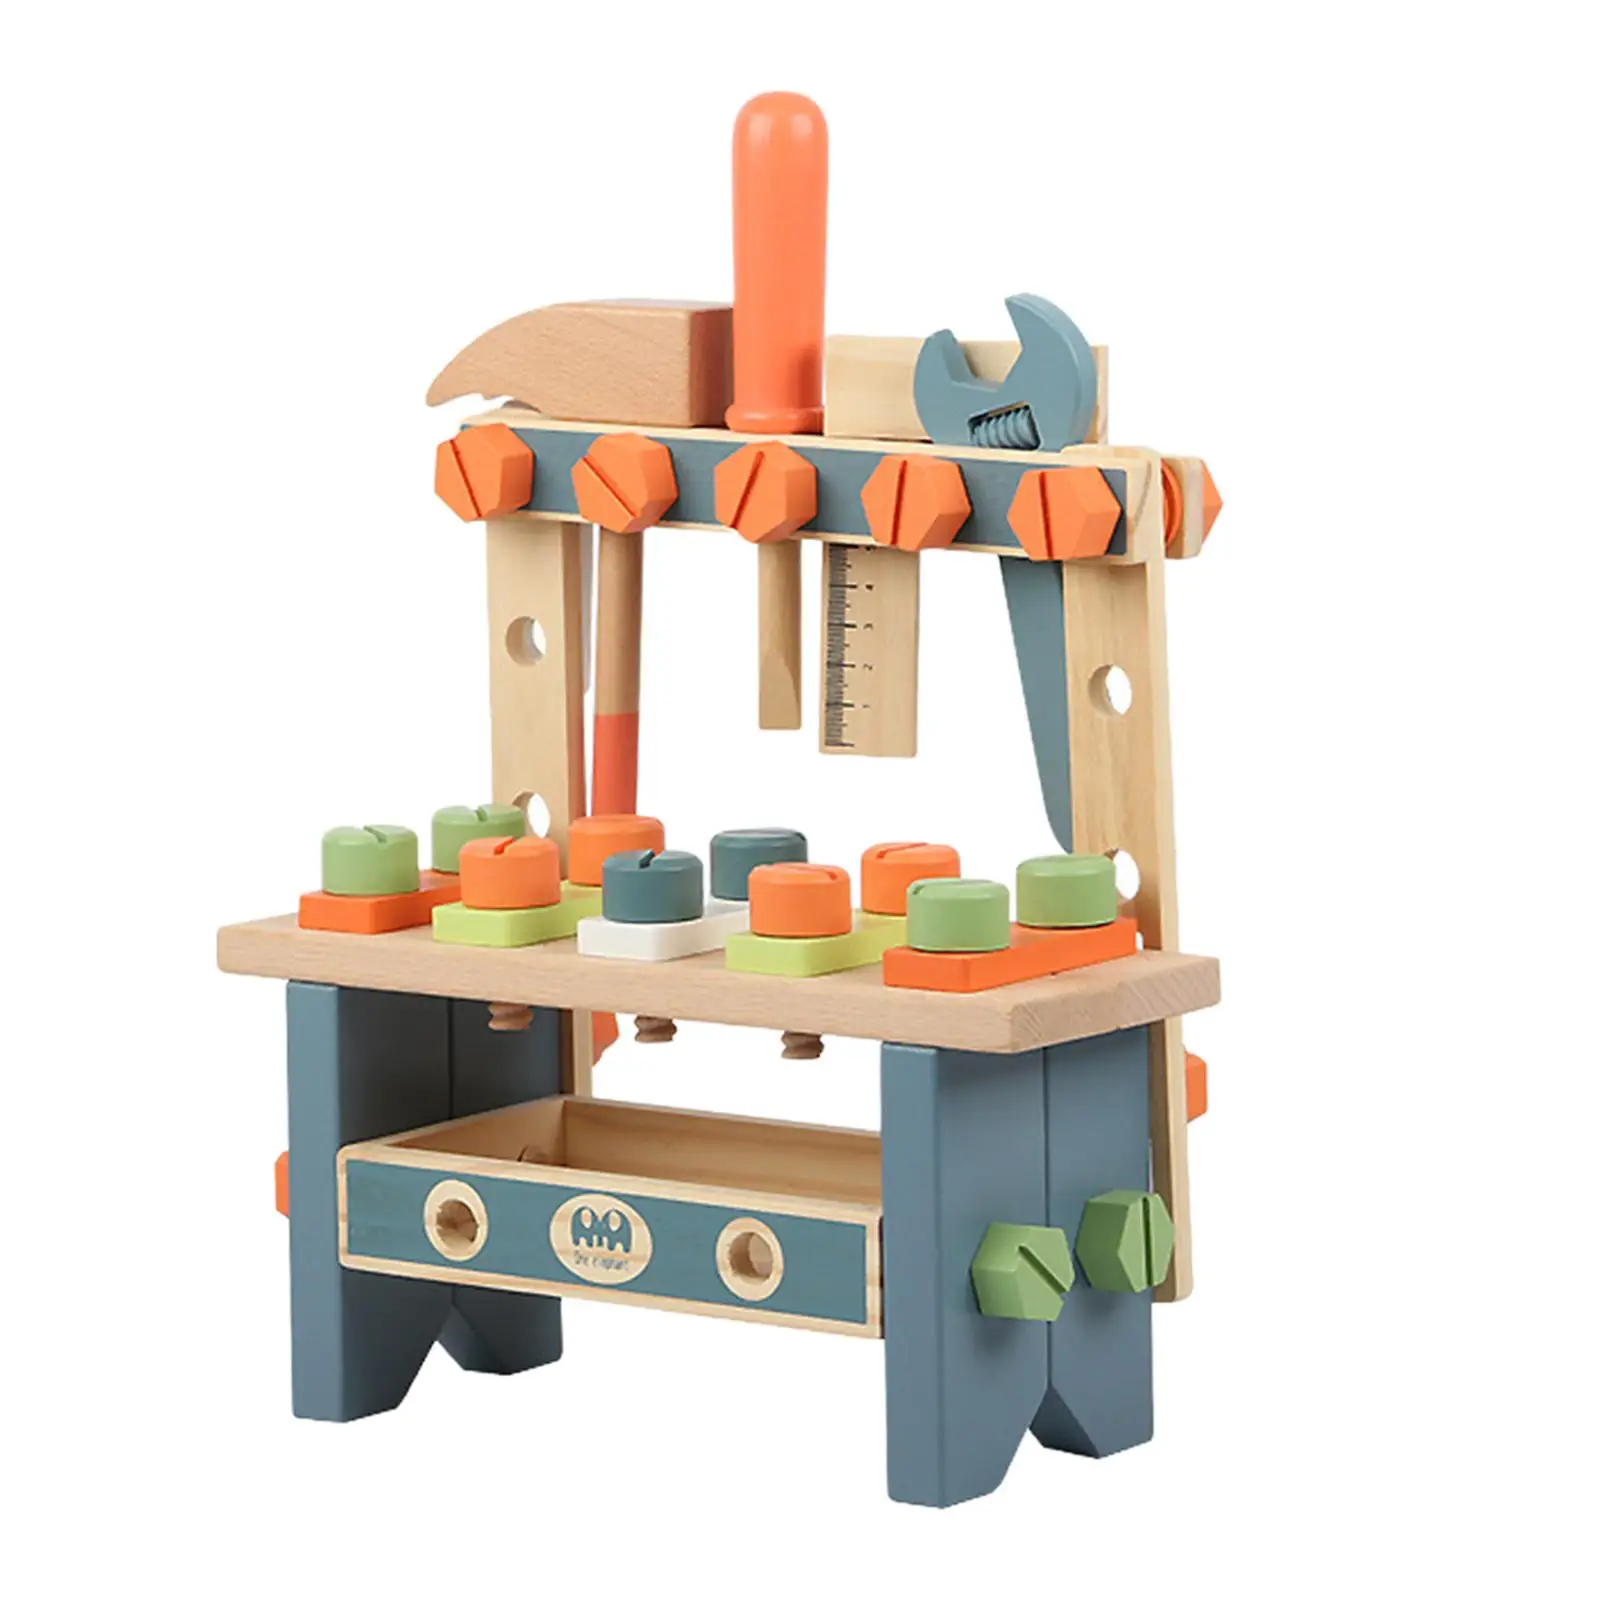 Mini Wooden Workbench for Children`s Play Tools for Toddlers,